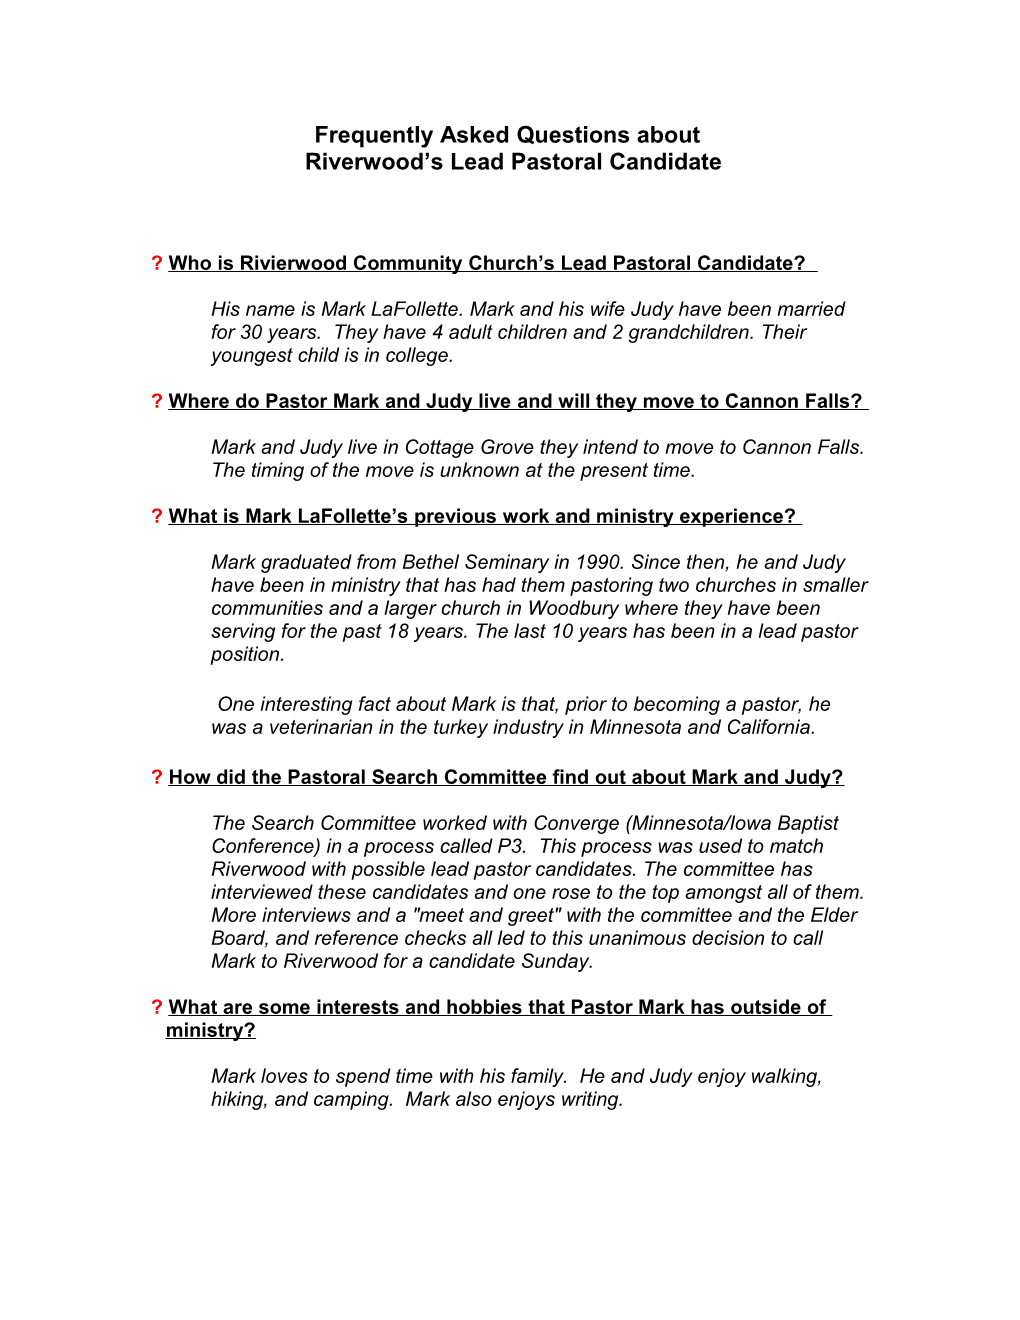 Frequently Asked Questions About Pastoral Candidate